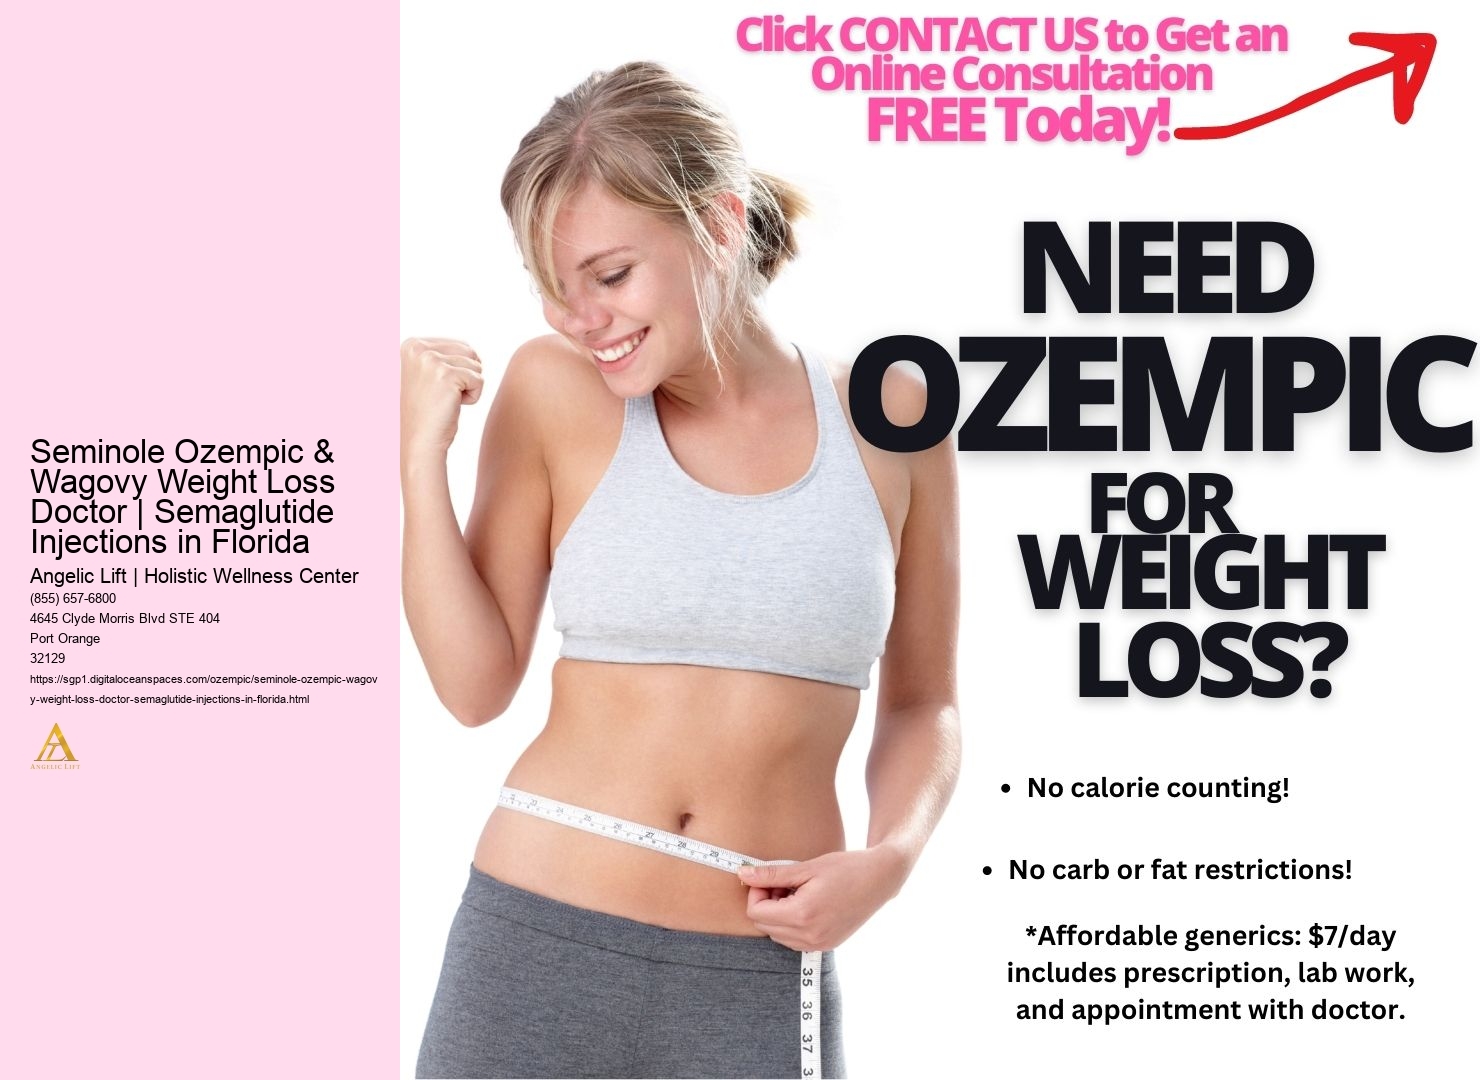 Seminole Ozempic & Wagovy Weight Loss Doctor | Semaglutide Injections in Florida